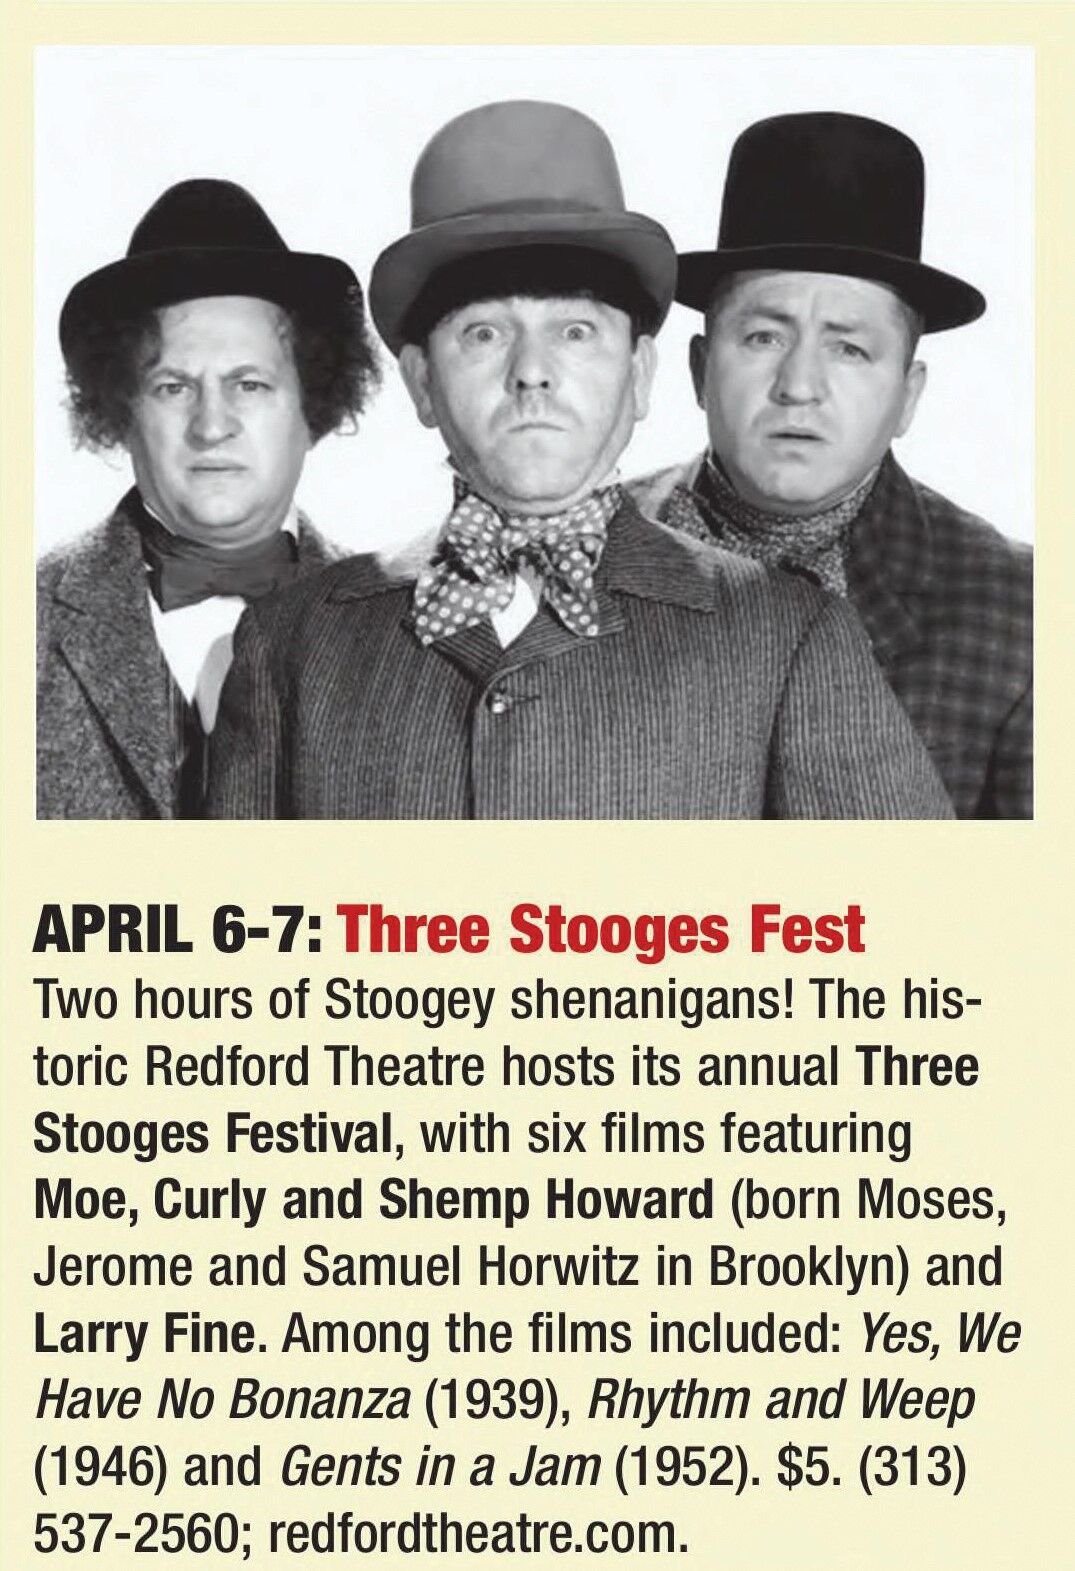 Looking Back: The Three Stooges | Mike Smith's Column